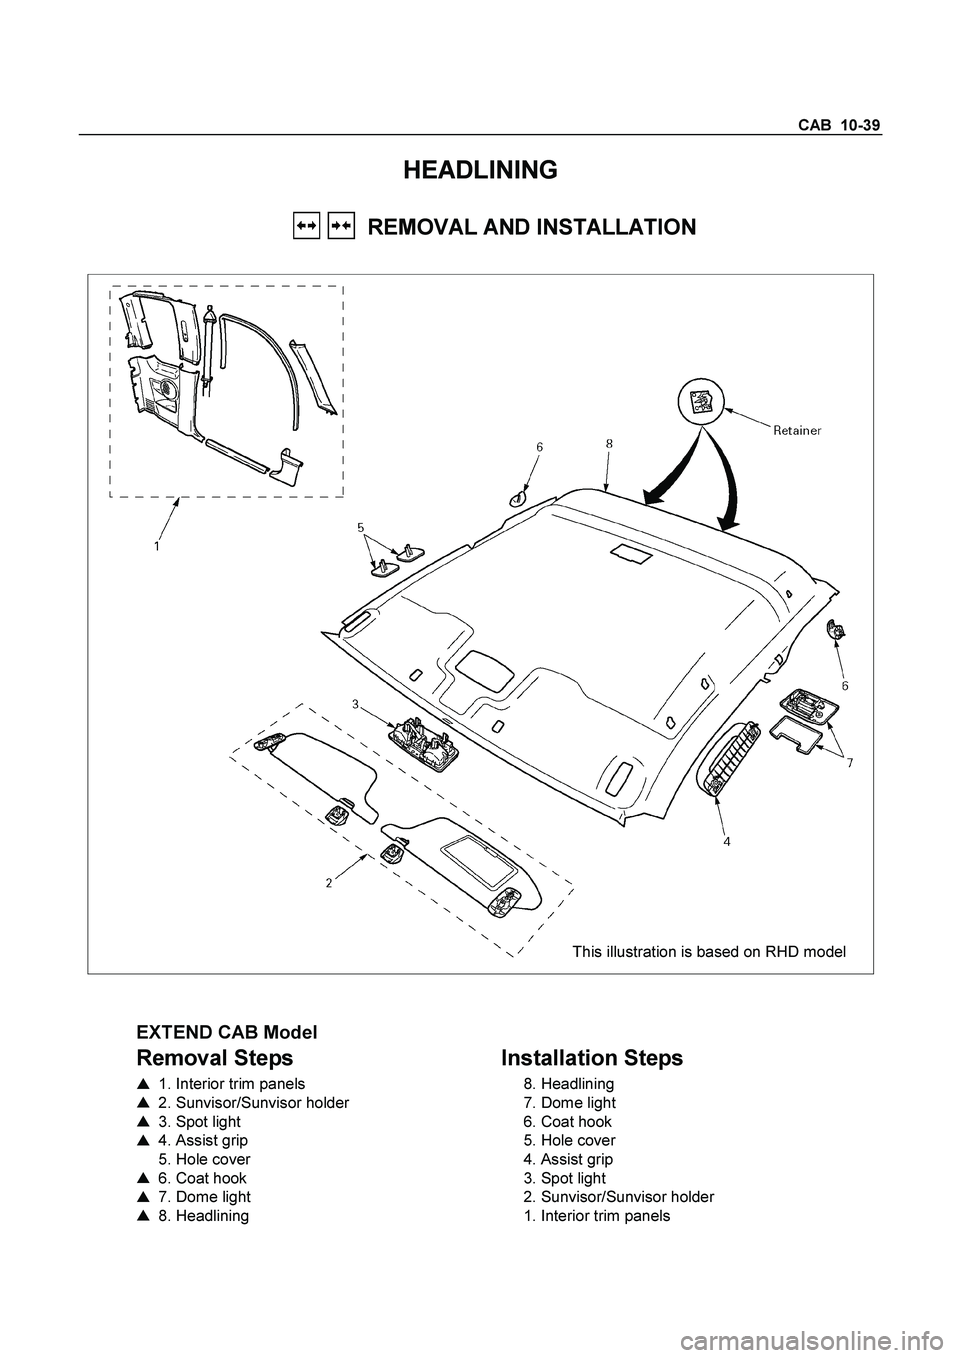 ISUZU TF SERIES 2004  Workshop Manual CAB  10-39 
HEADLINING 
     REMOVAL AND INSTALLATION 
 
 
This illustration is based on RHD model 
  
  
 
EXTEND CAB Model 
Removal Steps   
    1. Interior trim panels  
    2. Sunvisor/Sunvisor 